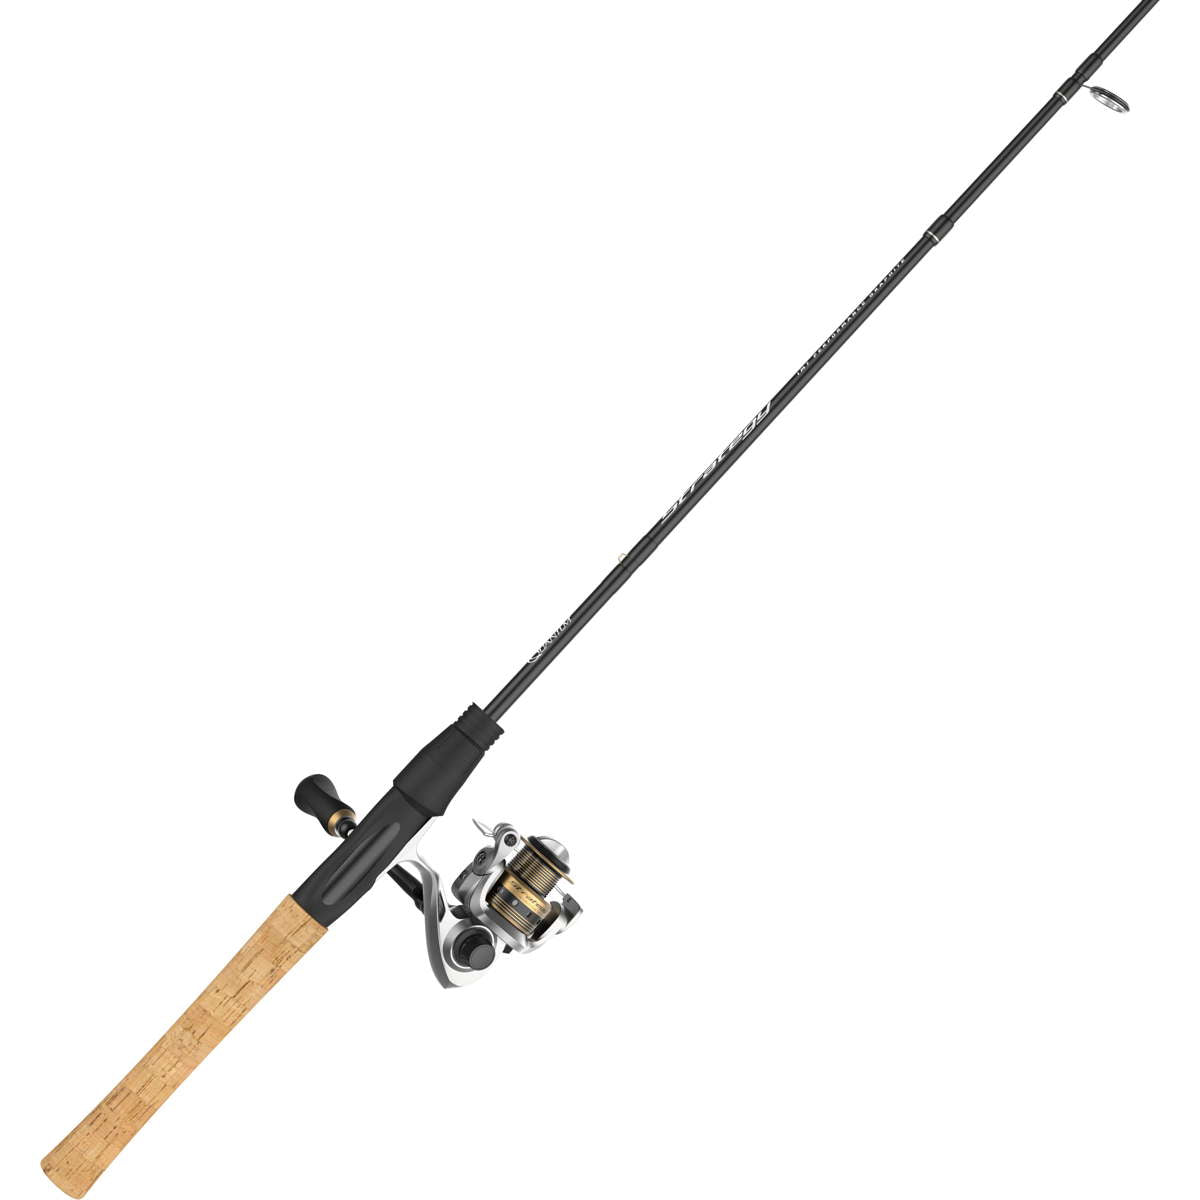 Photo of Quantum Strategy Spinning Combo for sale at United Tackle Shops.